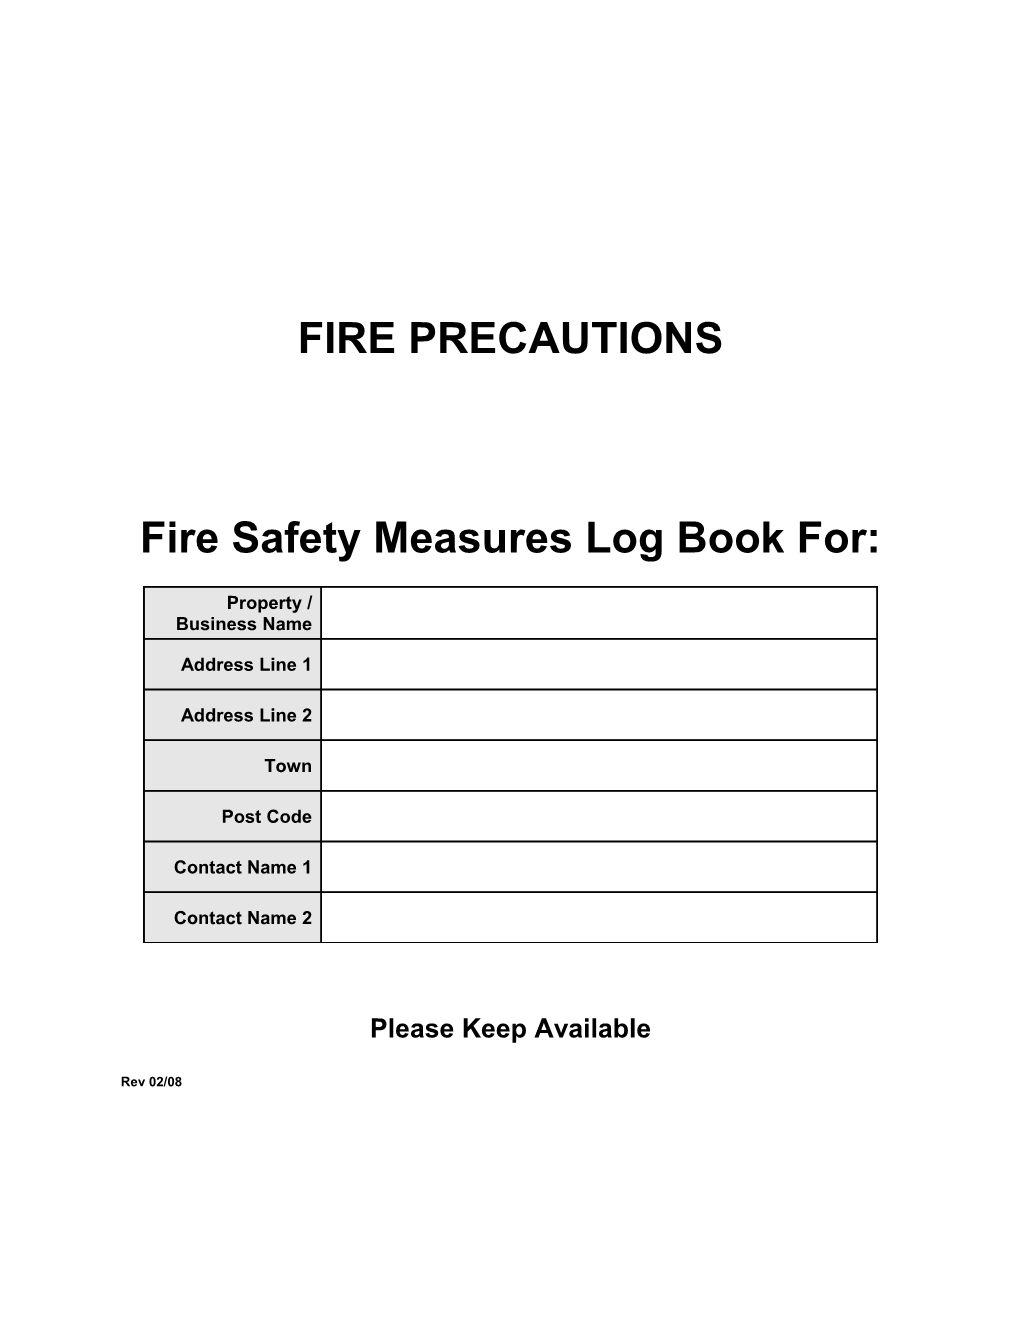 Fire Safety Measures Log Book For